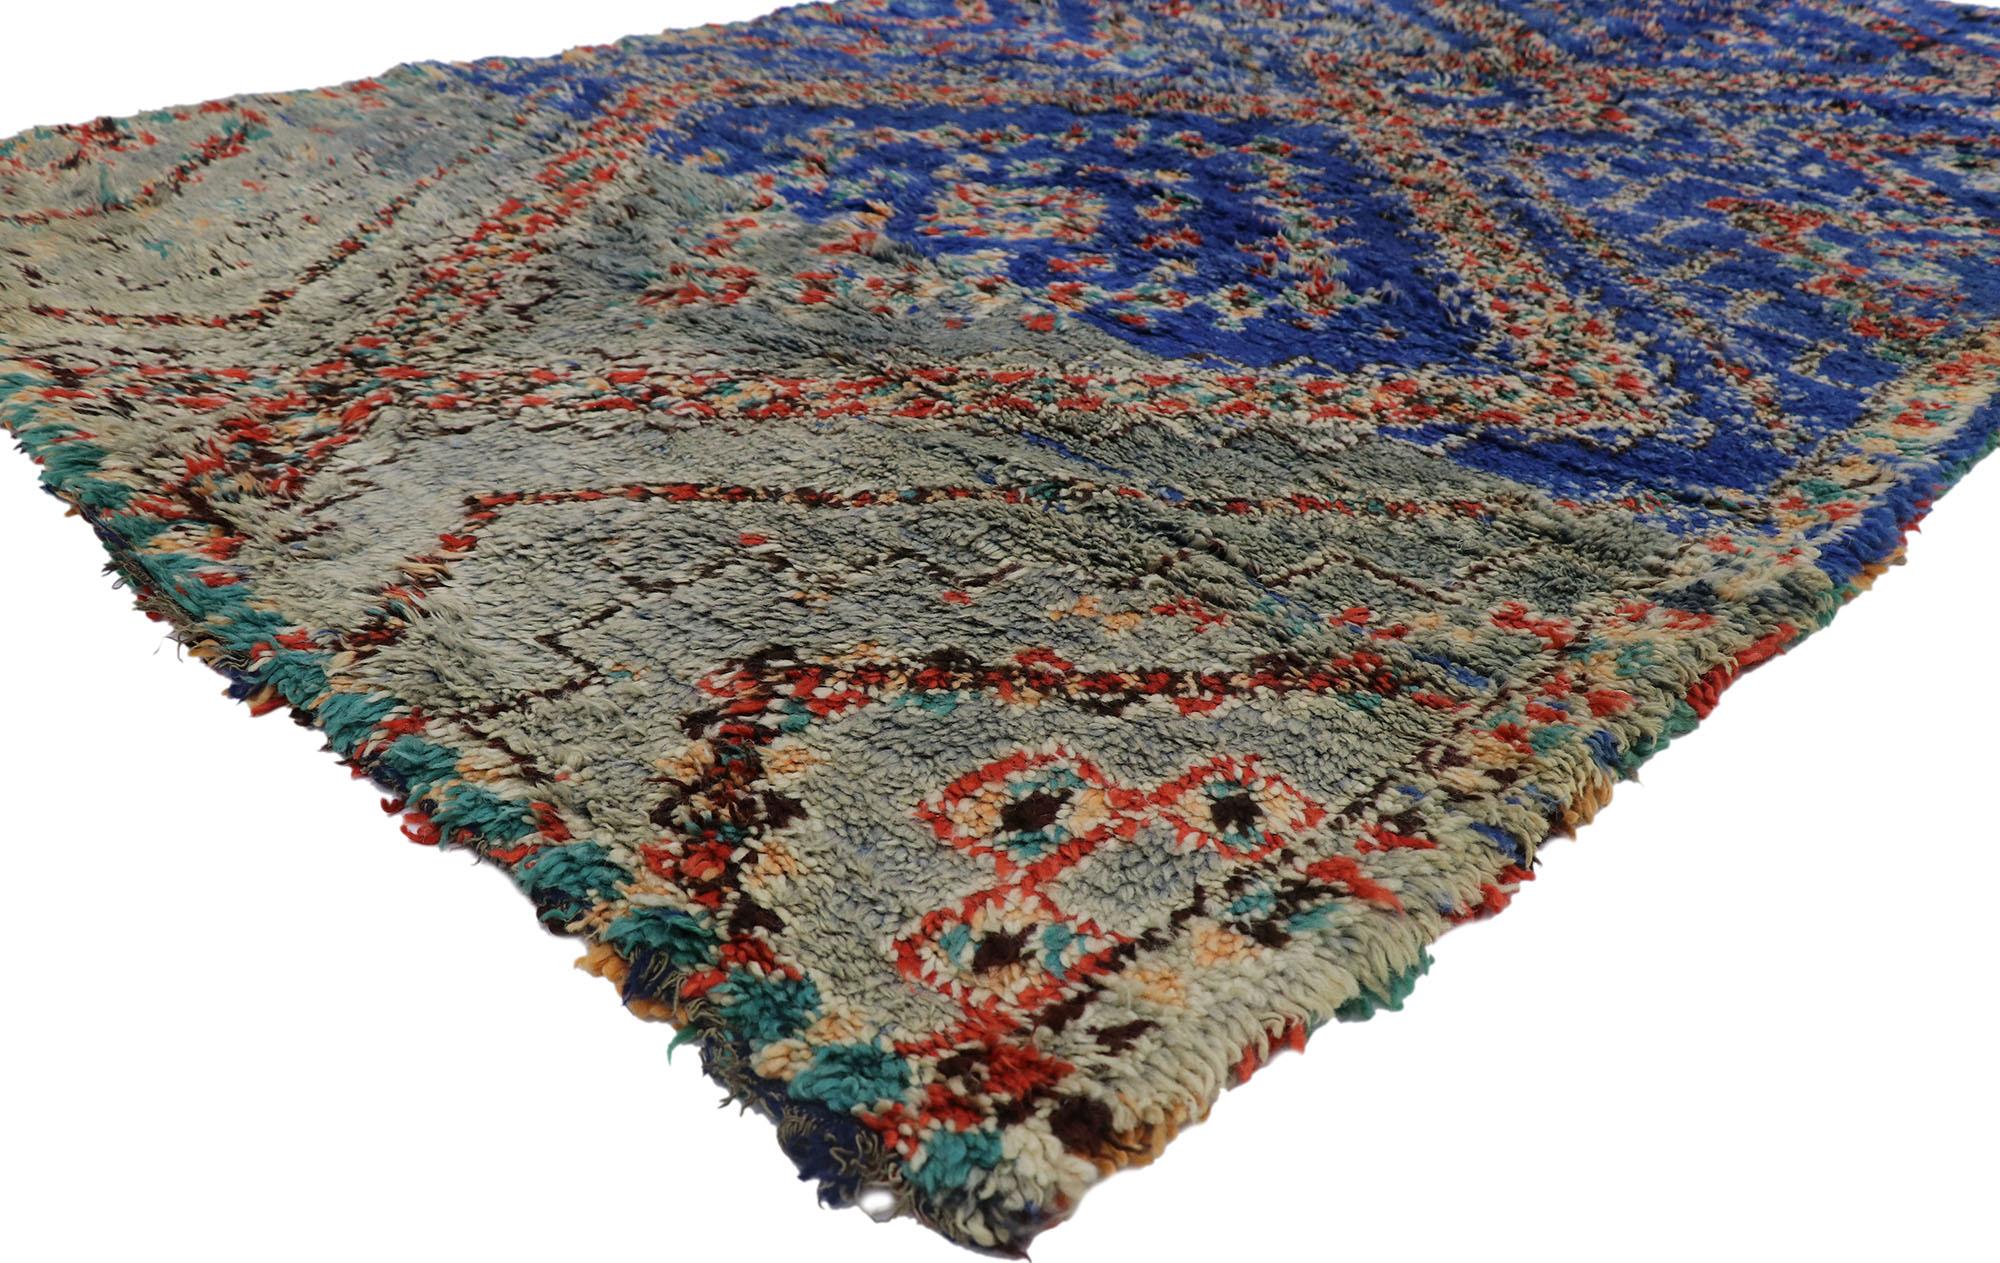 21290 Vintage Beni MGuild Moroccan Rug, 06'02 x 10'06.
Bold boho chic meets Midcentury Modern in this hand-knotted wool vintage Moroccan rug. The distinctive tribal design and lively earth-tone colors woven into this piece work together evoking the